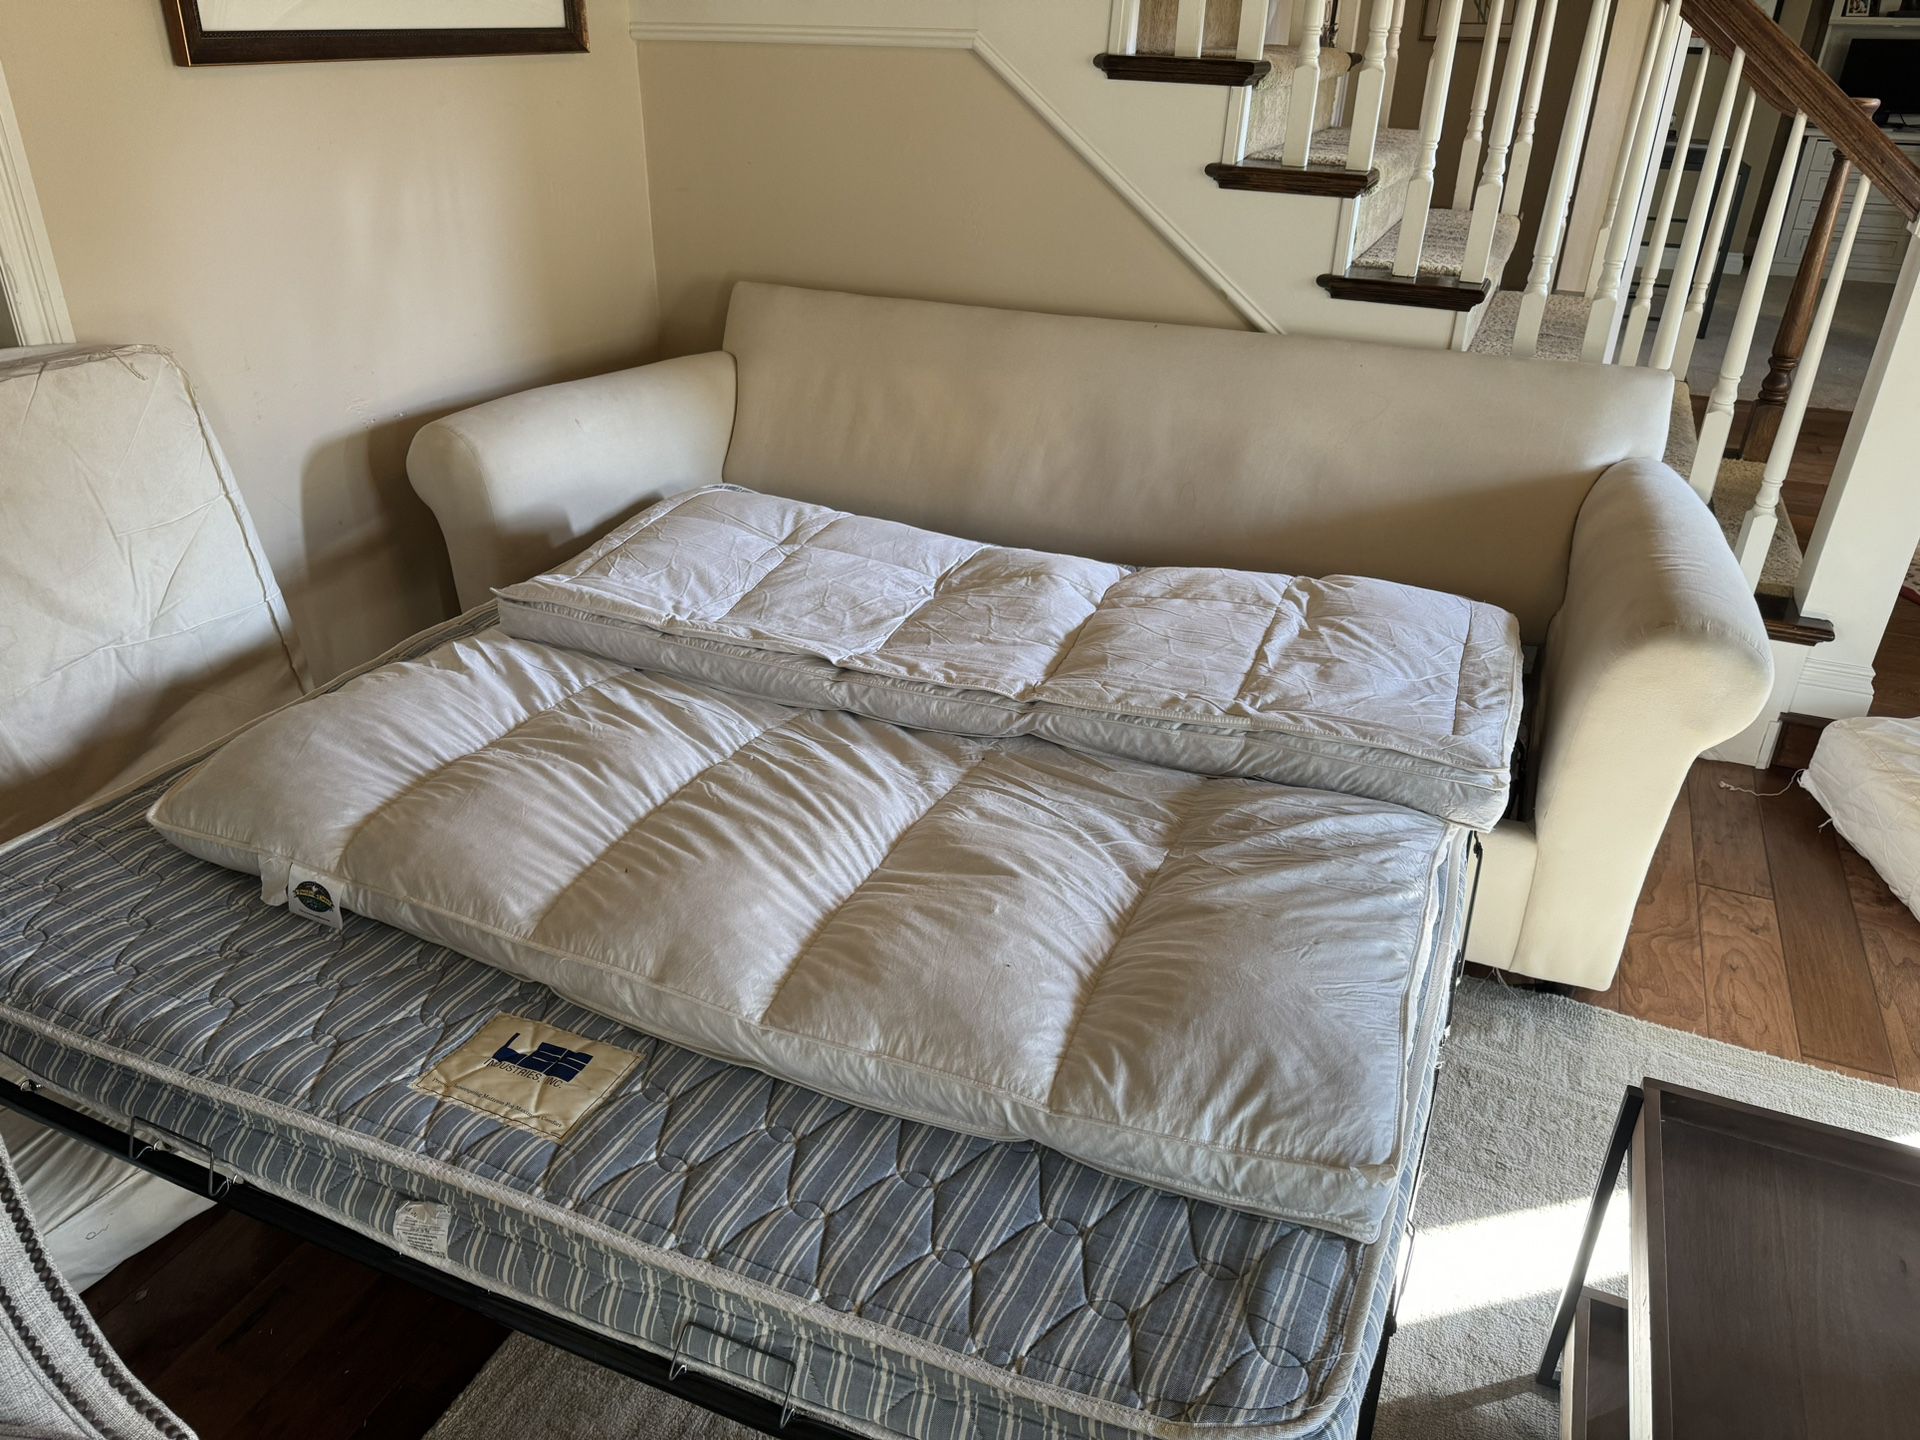 Queen sofa sleeper With Down Mattress Pad Included 